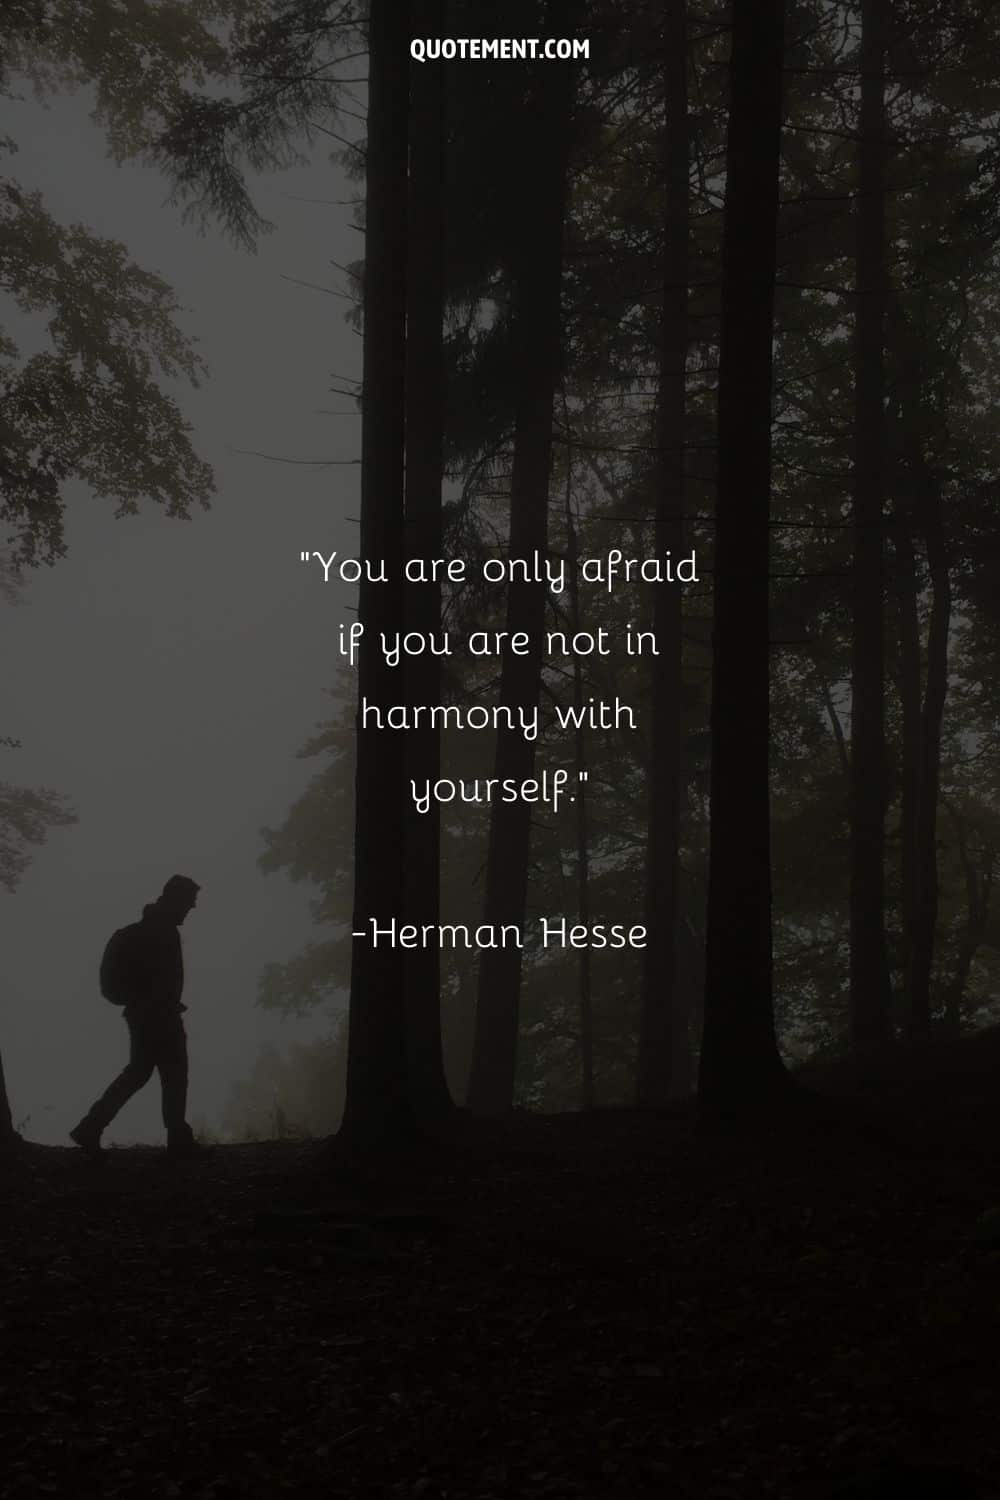 You are only afraid if you are not in harmony with yourself